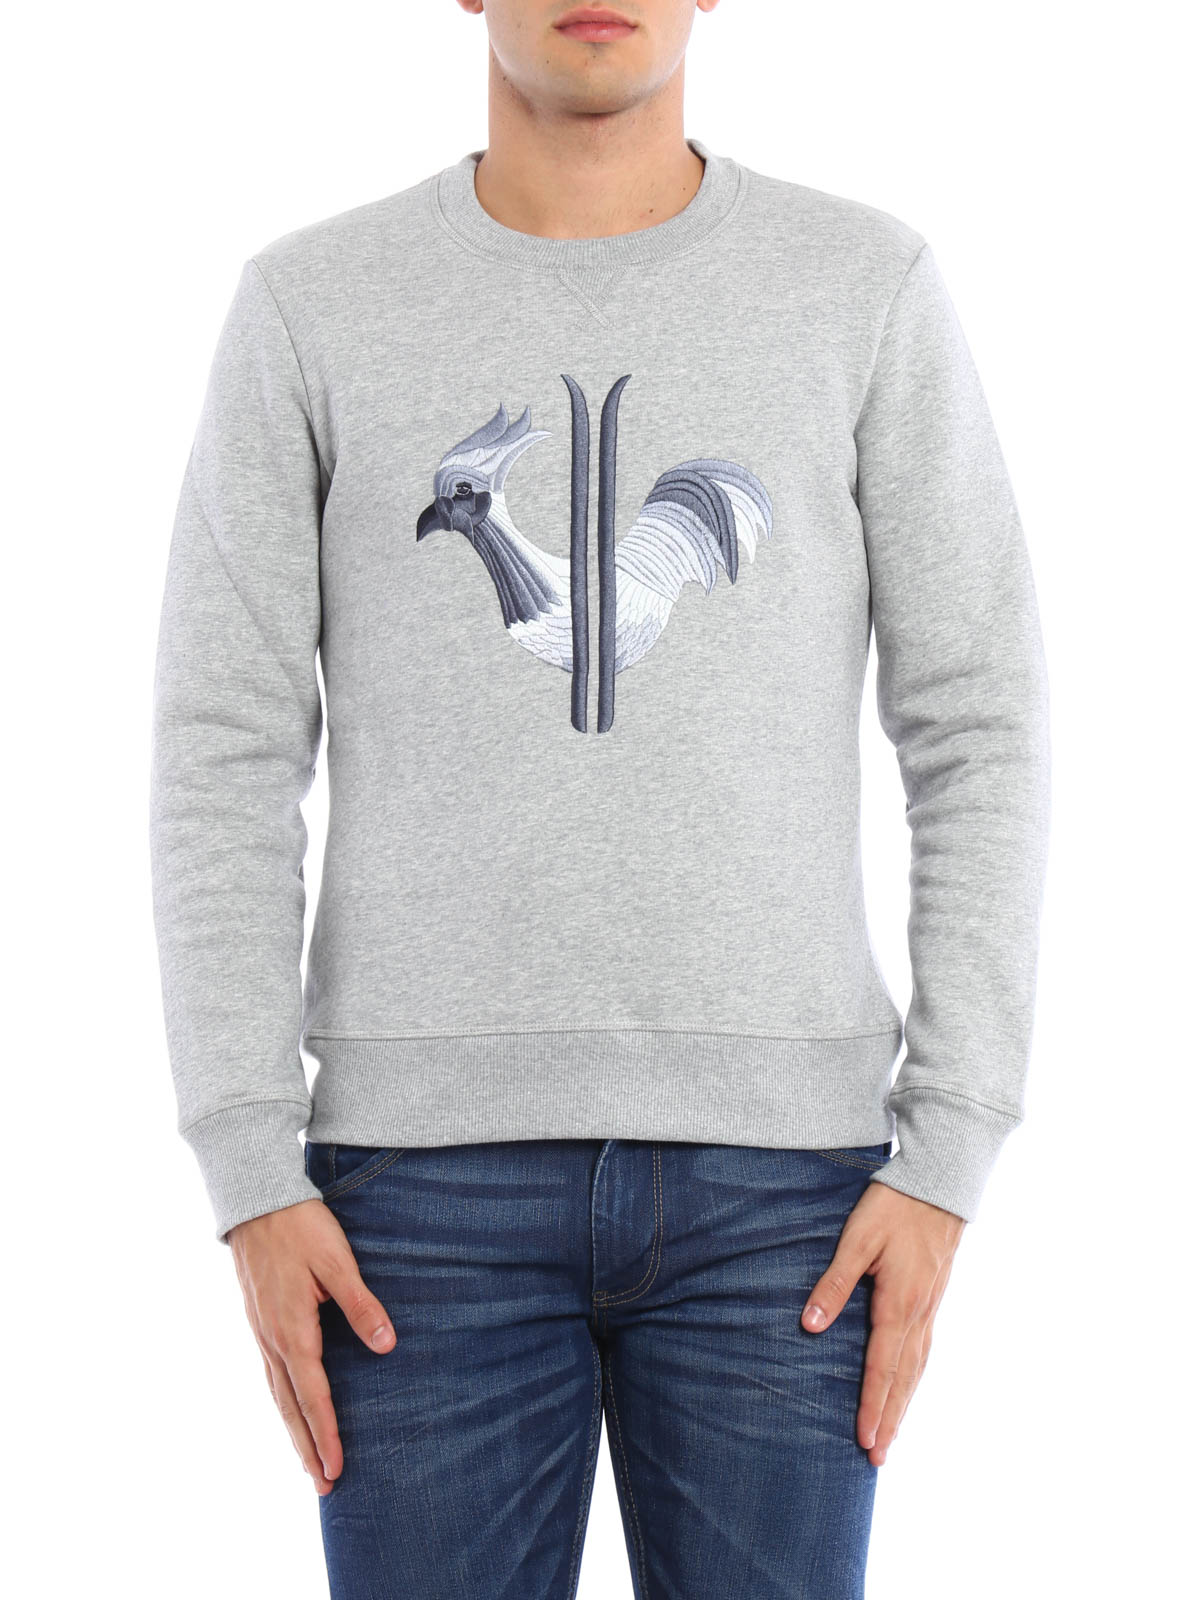 ROSSIGNOL SWEAT SHIRT PULL BLEU TAILLE S VAL 89€ vbaqsx 